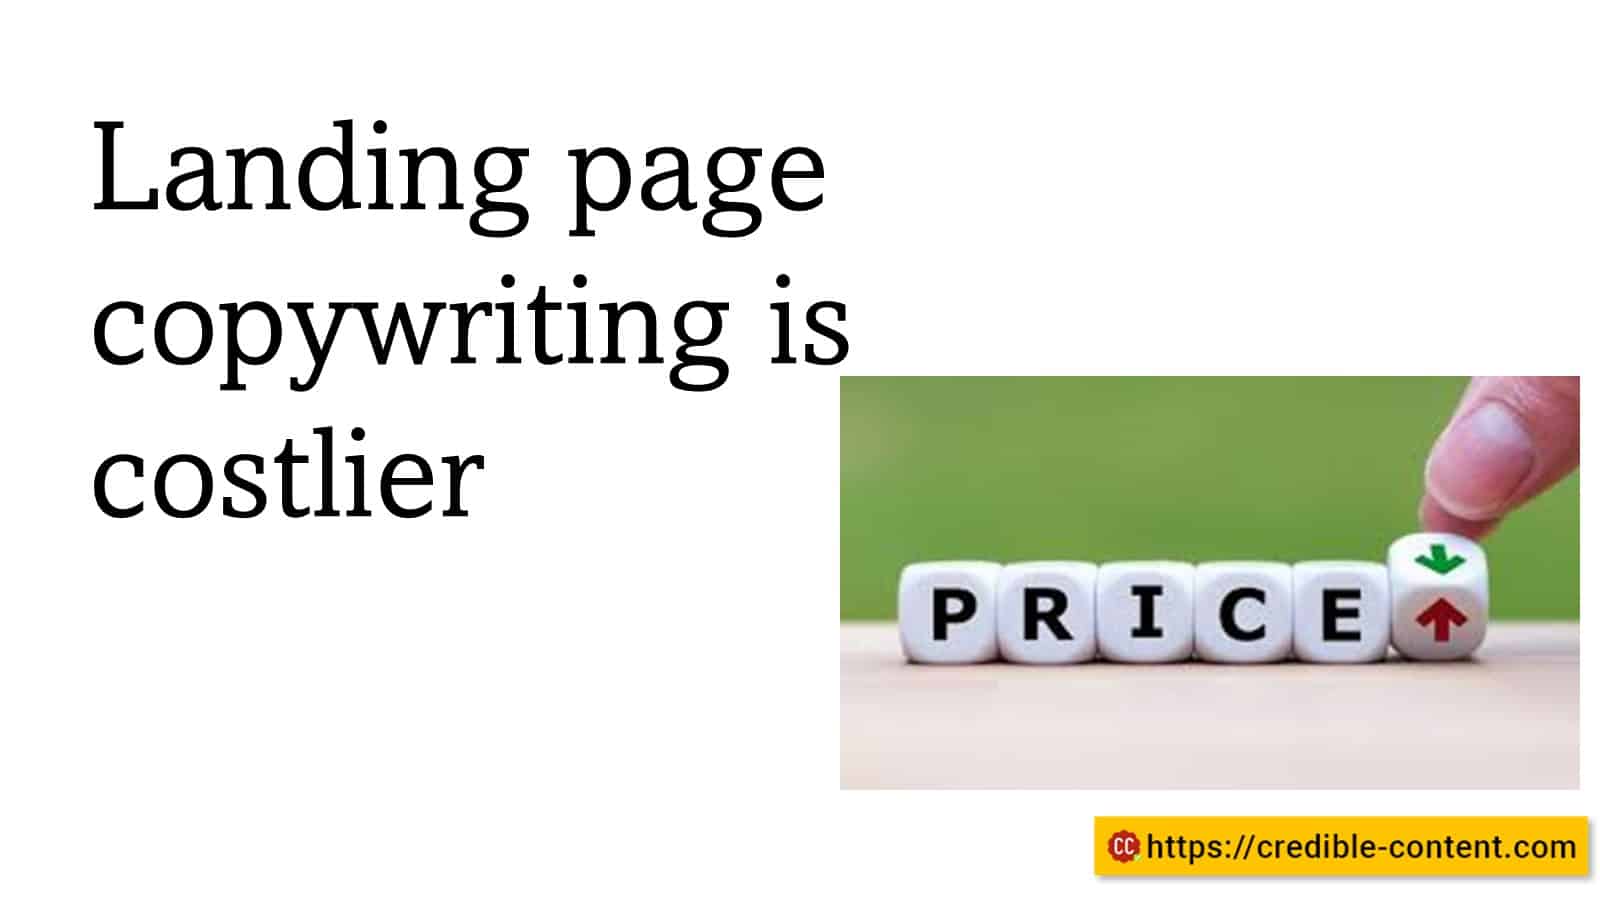 Landing page copywriting is costlier